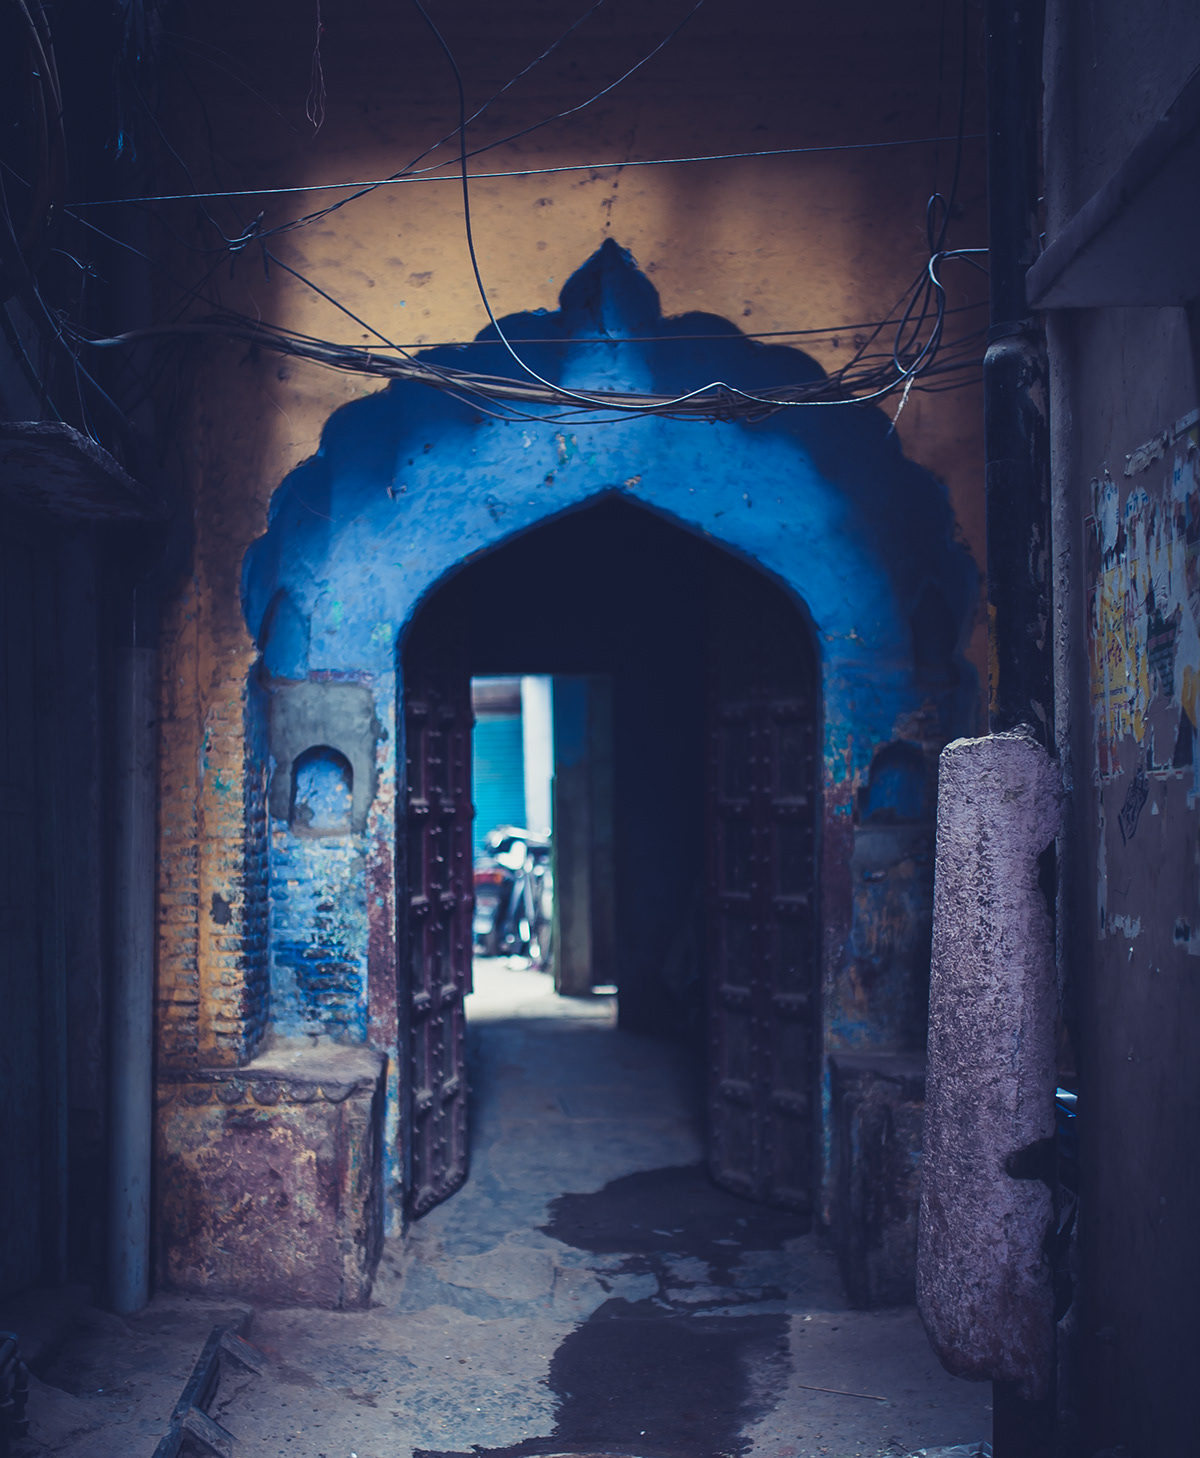 Delhi invisible Cities abandoned ruins India Travel light Stories